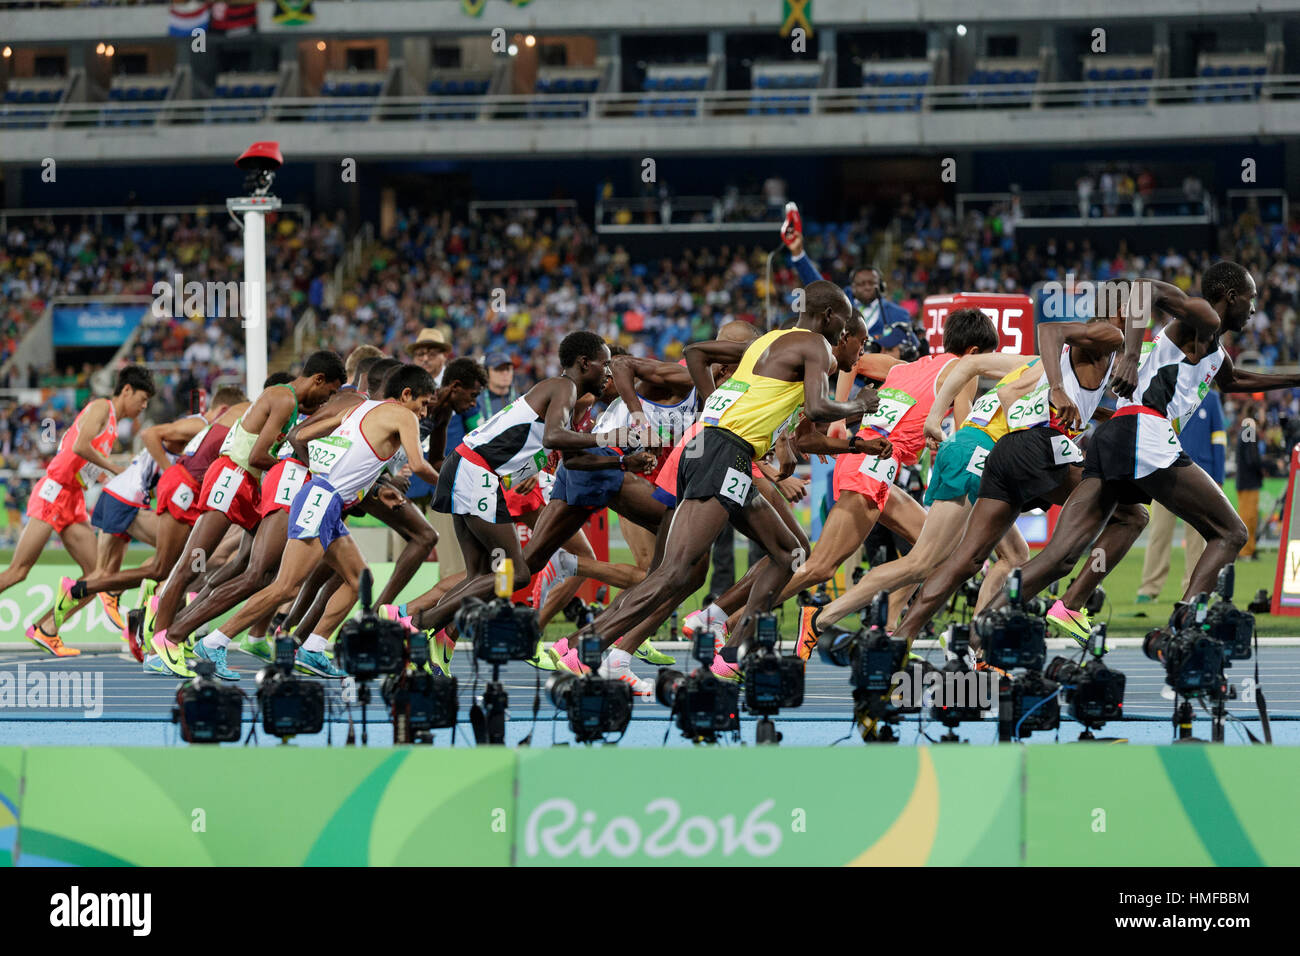 Start of the Men's 10,000m at the 2016 Olympic Summer Games. ©Paul J. Sutton/PCN Photography. Stock Photo